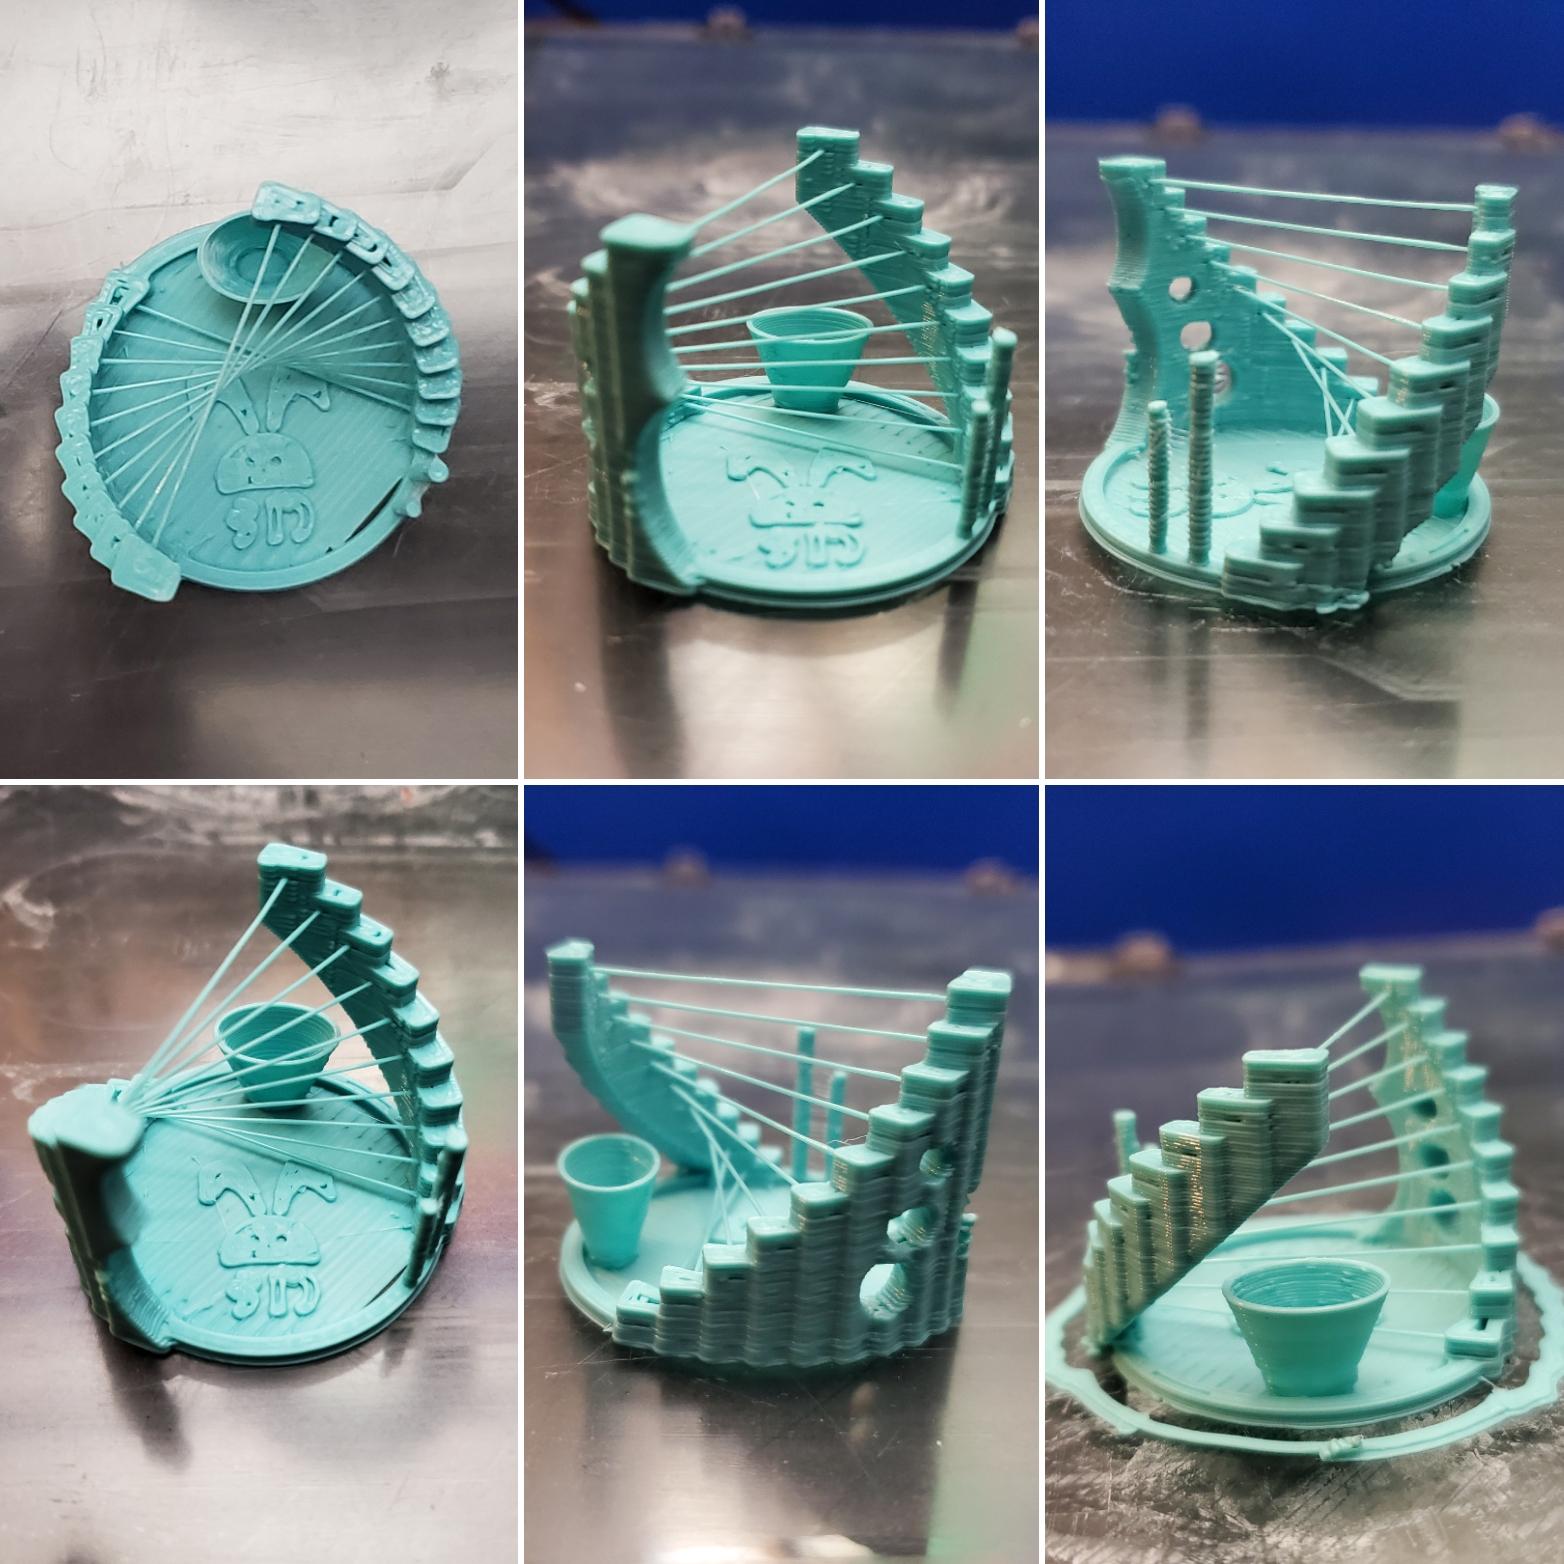 Printer Health Check - quick print torture test - A nice multifaceted printer test :)

Dialing in a .6 nozzle on a CR-10 S5. Not a bad start, but still needs tinkering.

Thank you for sharing! - 3d model